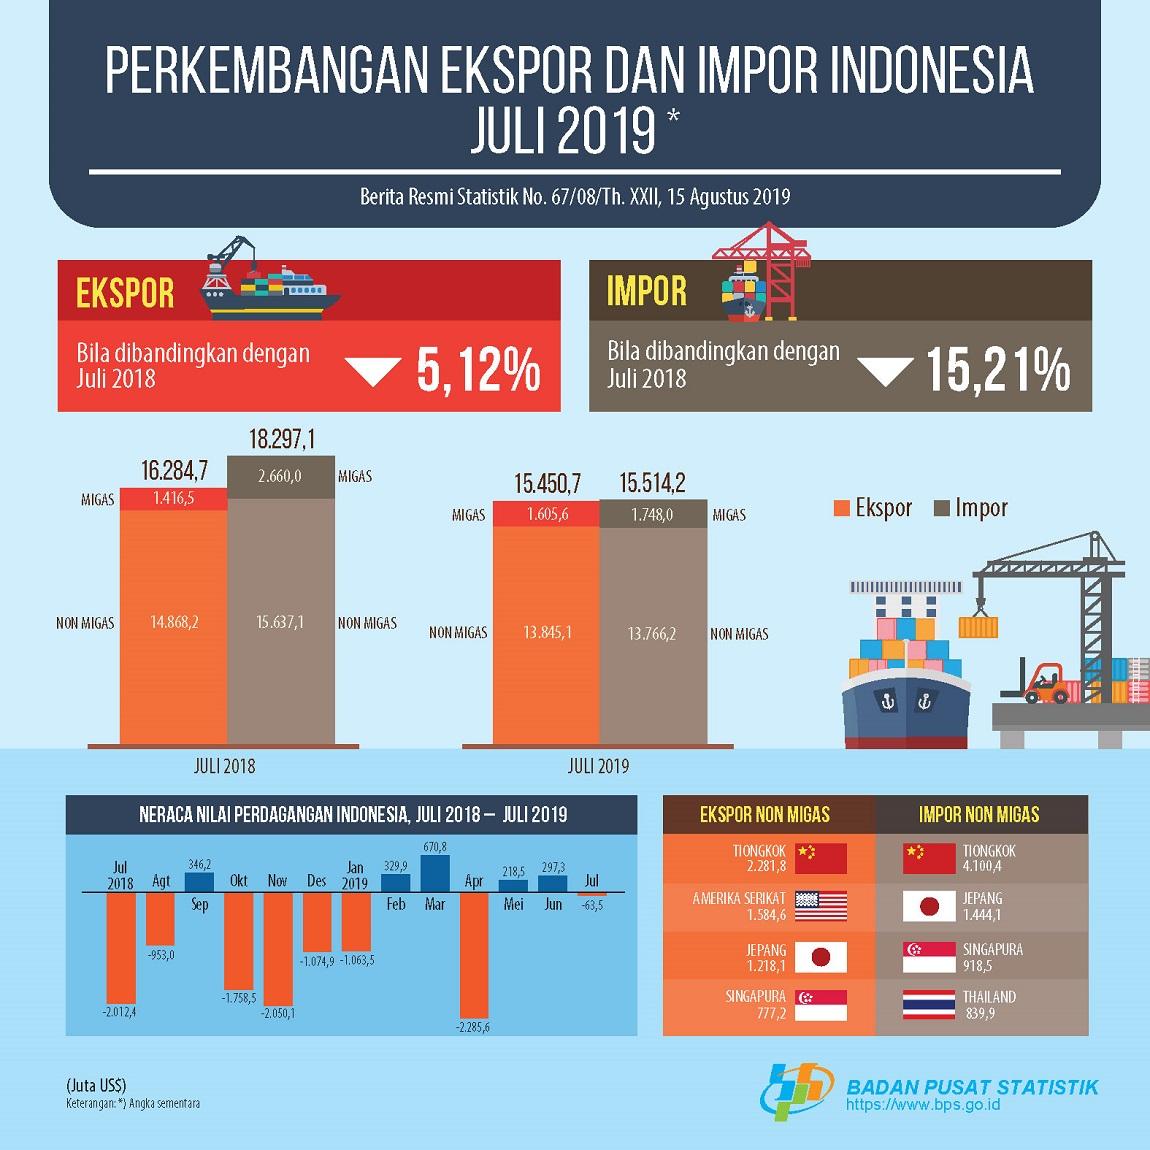 July 2019 exports reached US$15.45 billion, imports reached to US$15.51 billion